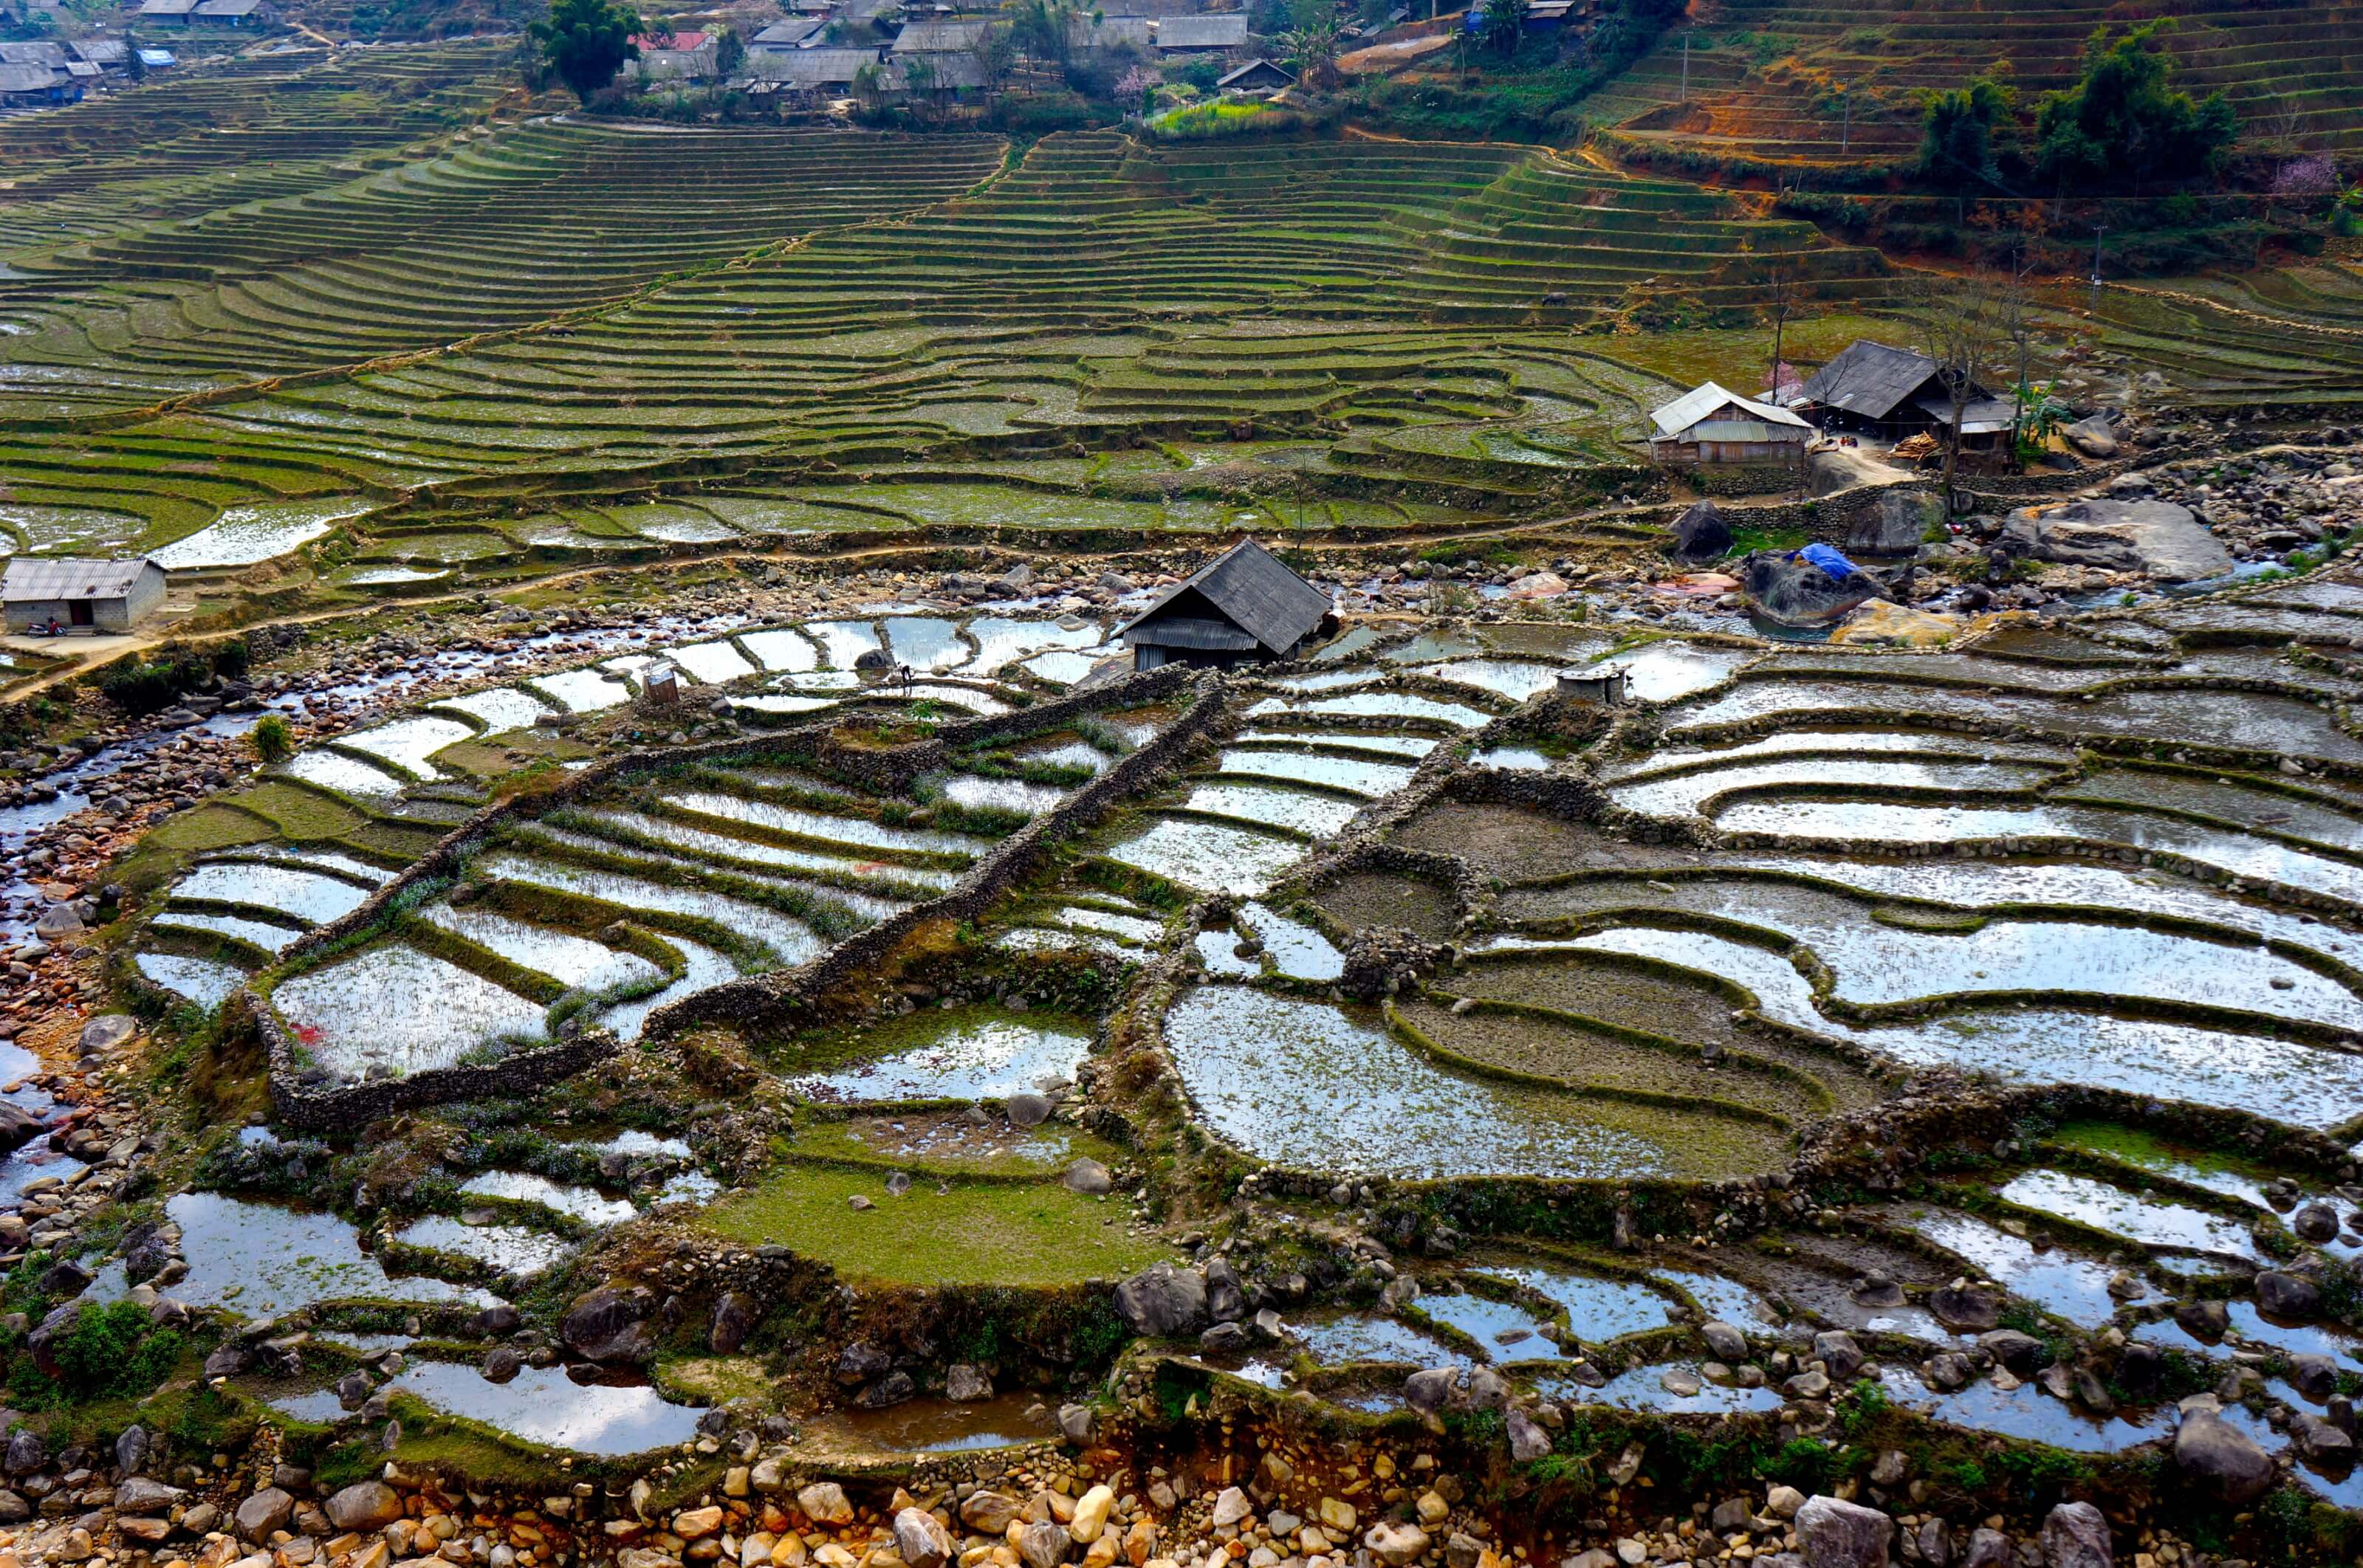 Sapa: our travel guide for a trek in the rice fields of Vietnam